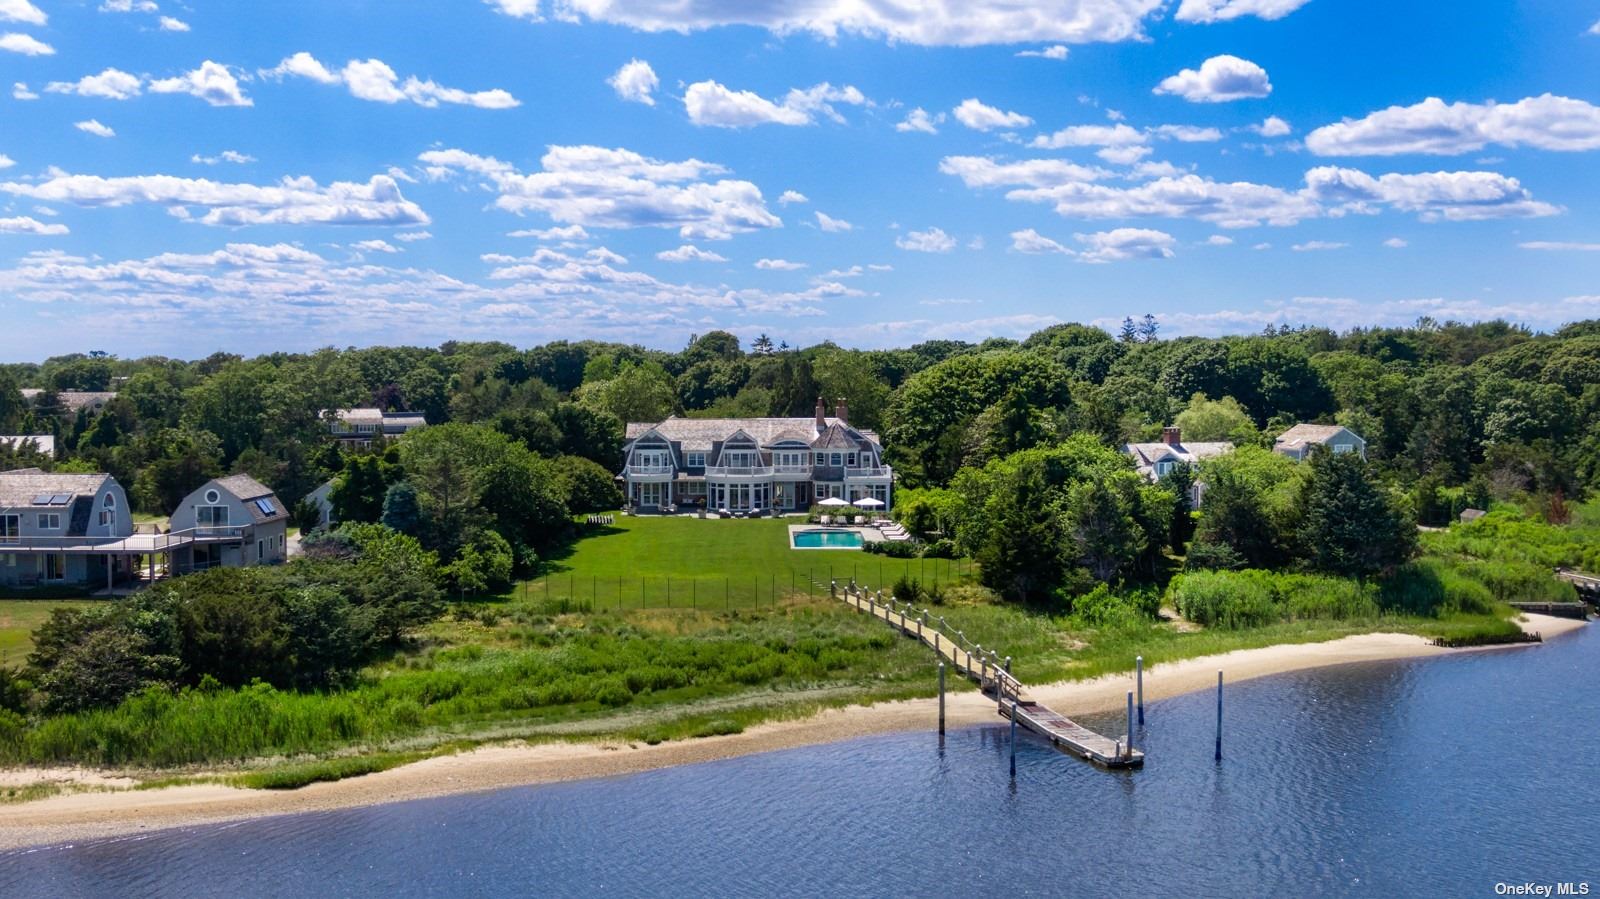 Property for Sale at 2 Delafield Street, Westhampton Beach, Hamptons, NY - Bedrooms: 9 
Bathrooms: 9.5  - $8,995,000